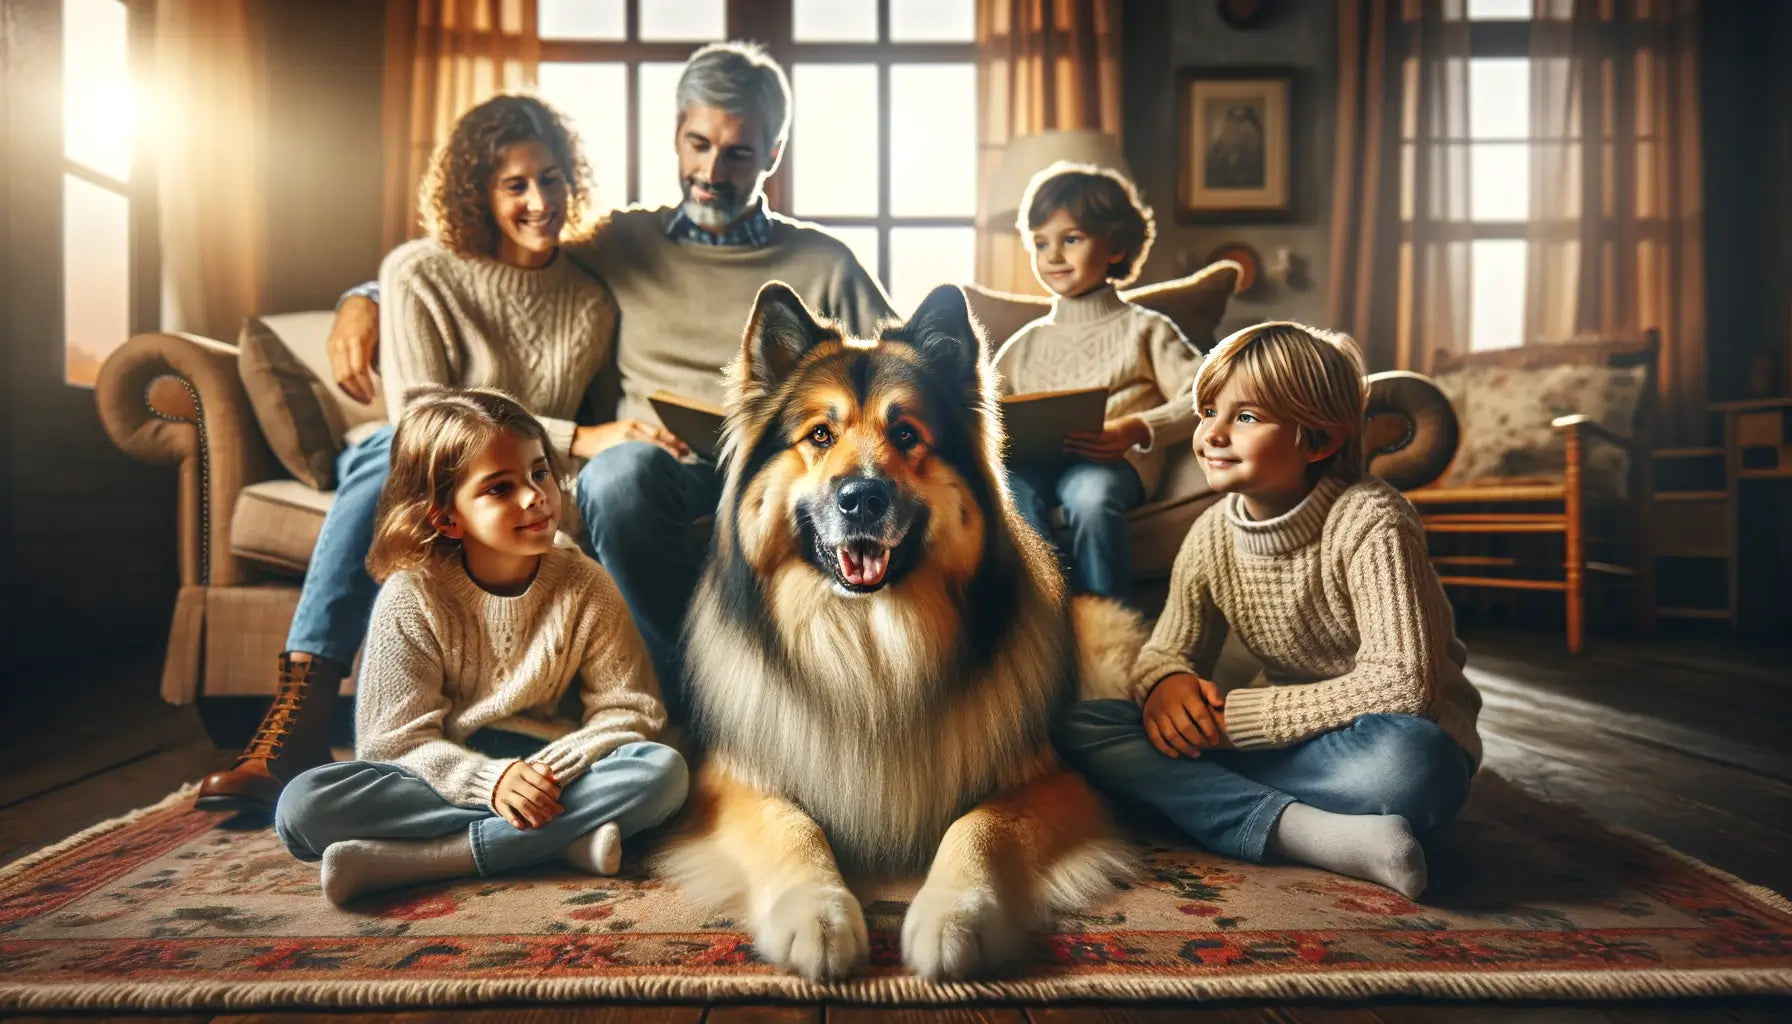 A Shiloh Shepherd integrated into a loving family environment, illustrating the bond between the dog and its family members.